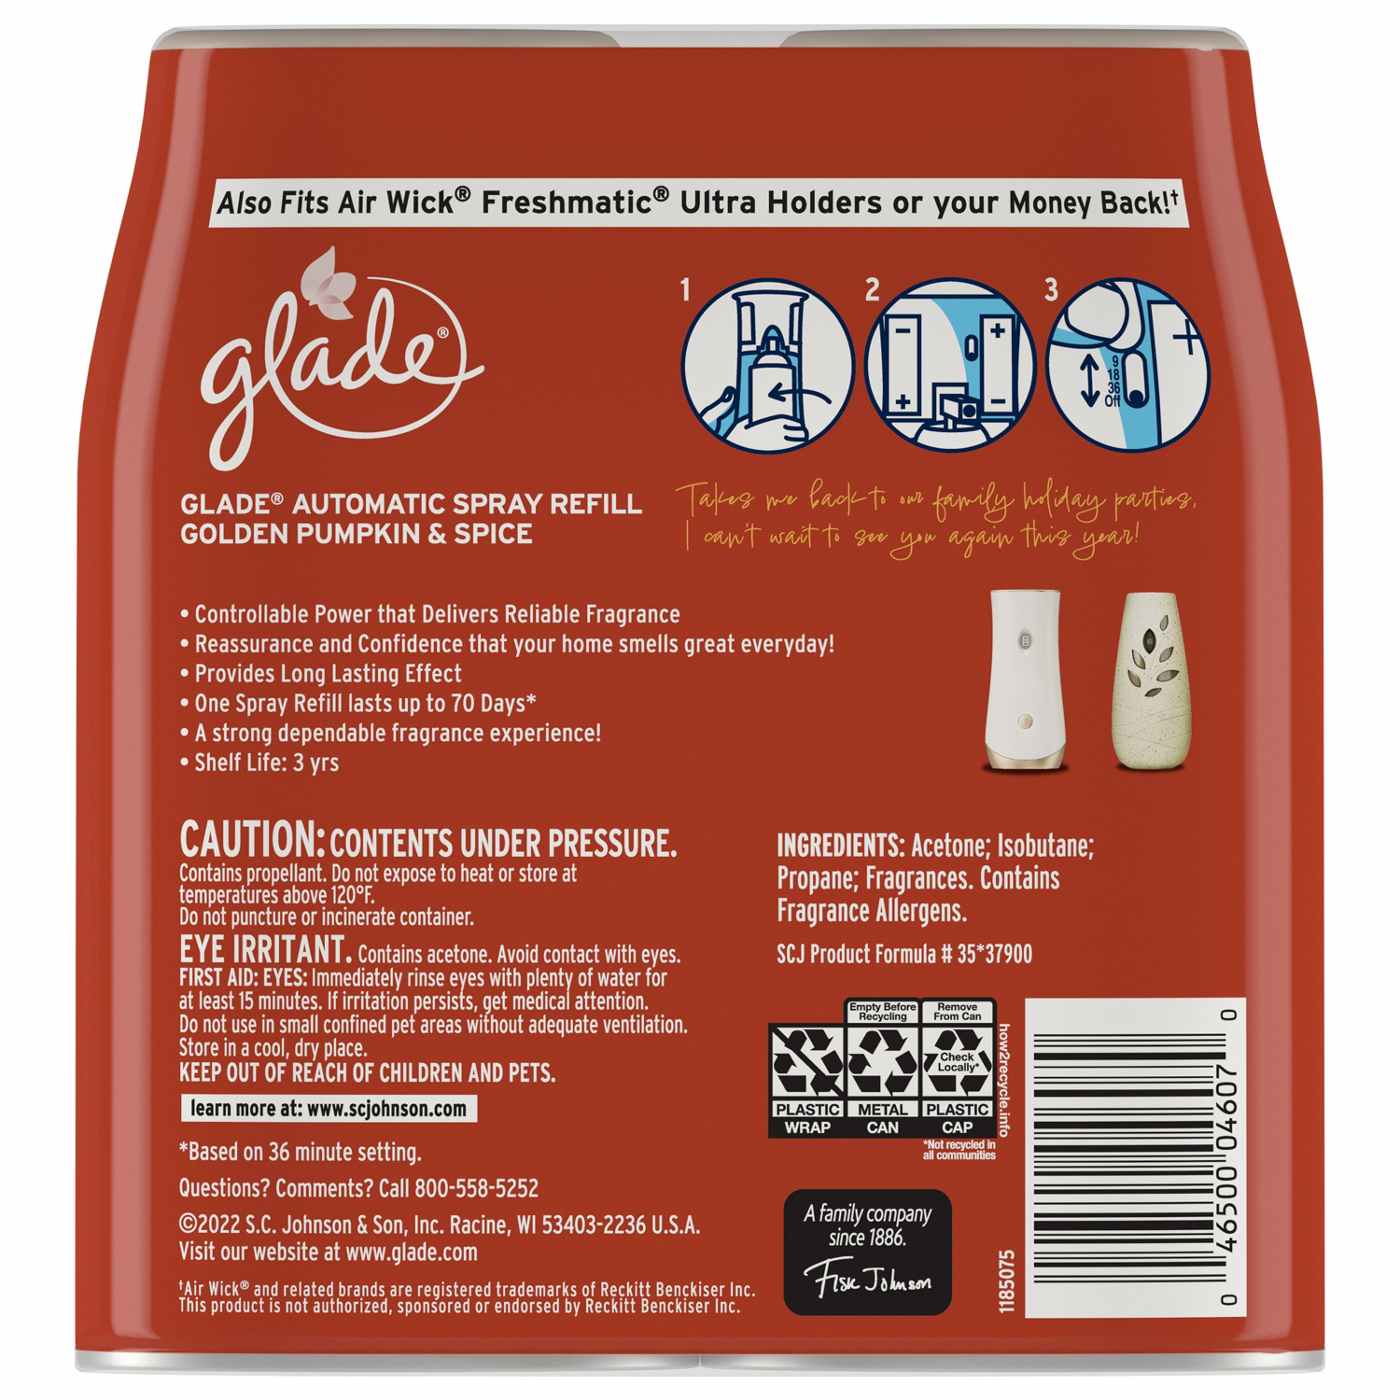 Glade Automatic Spray Refill, Value Pack - Golden Pumpkin & Spice; image 2 of 3